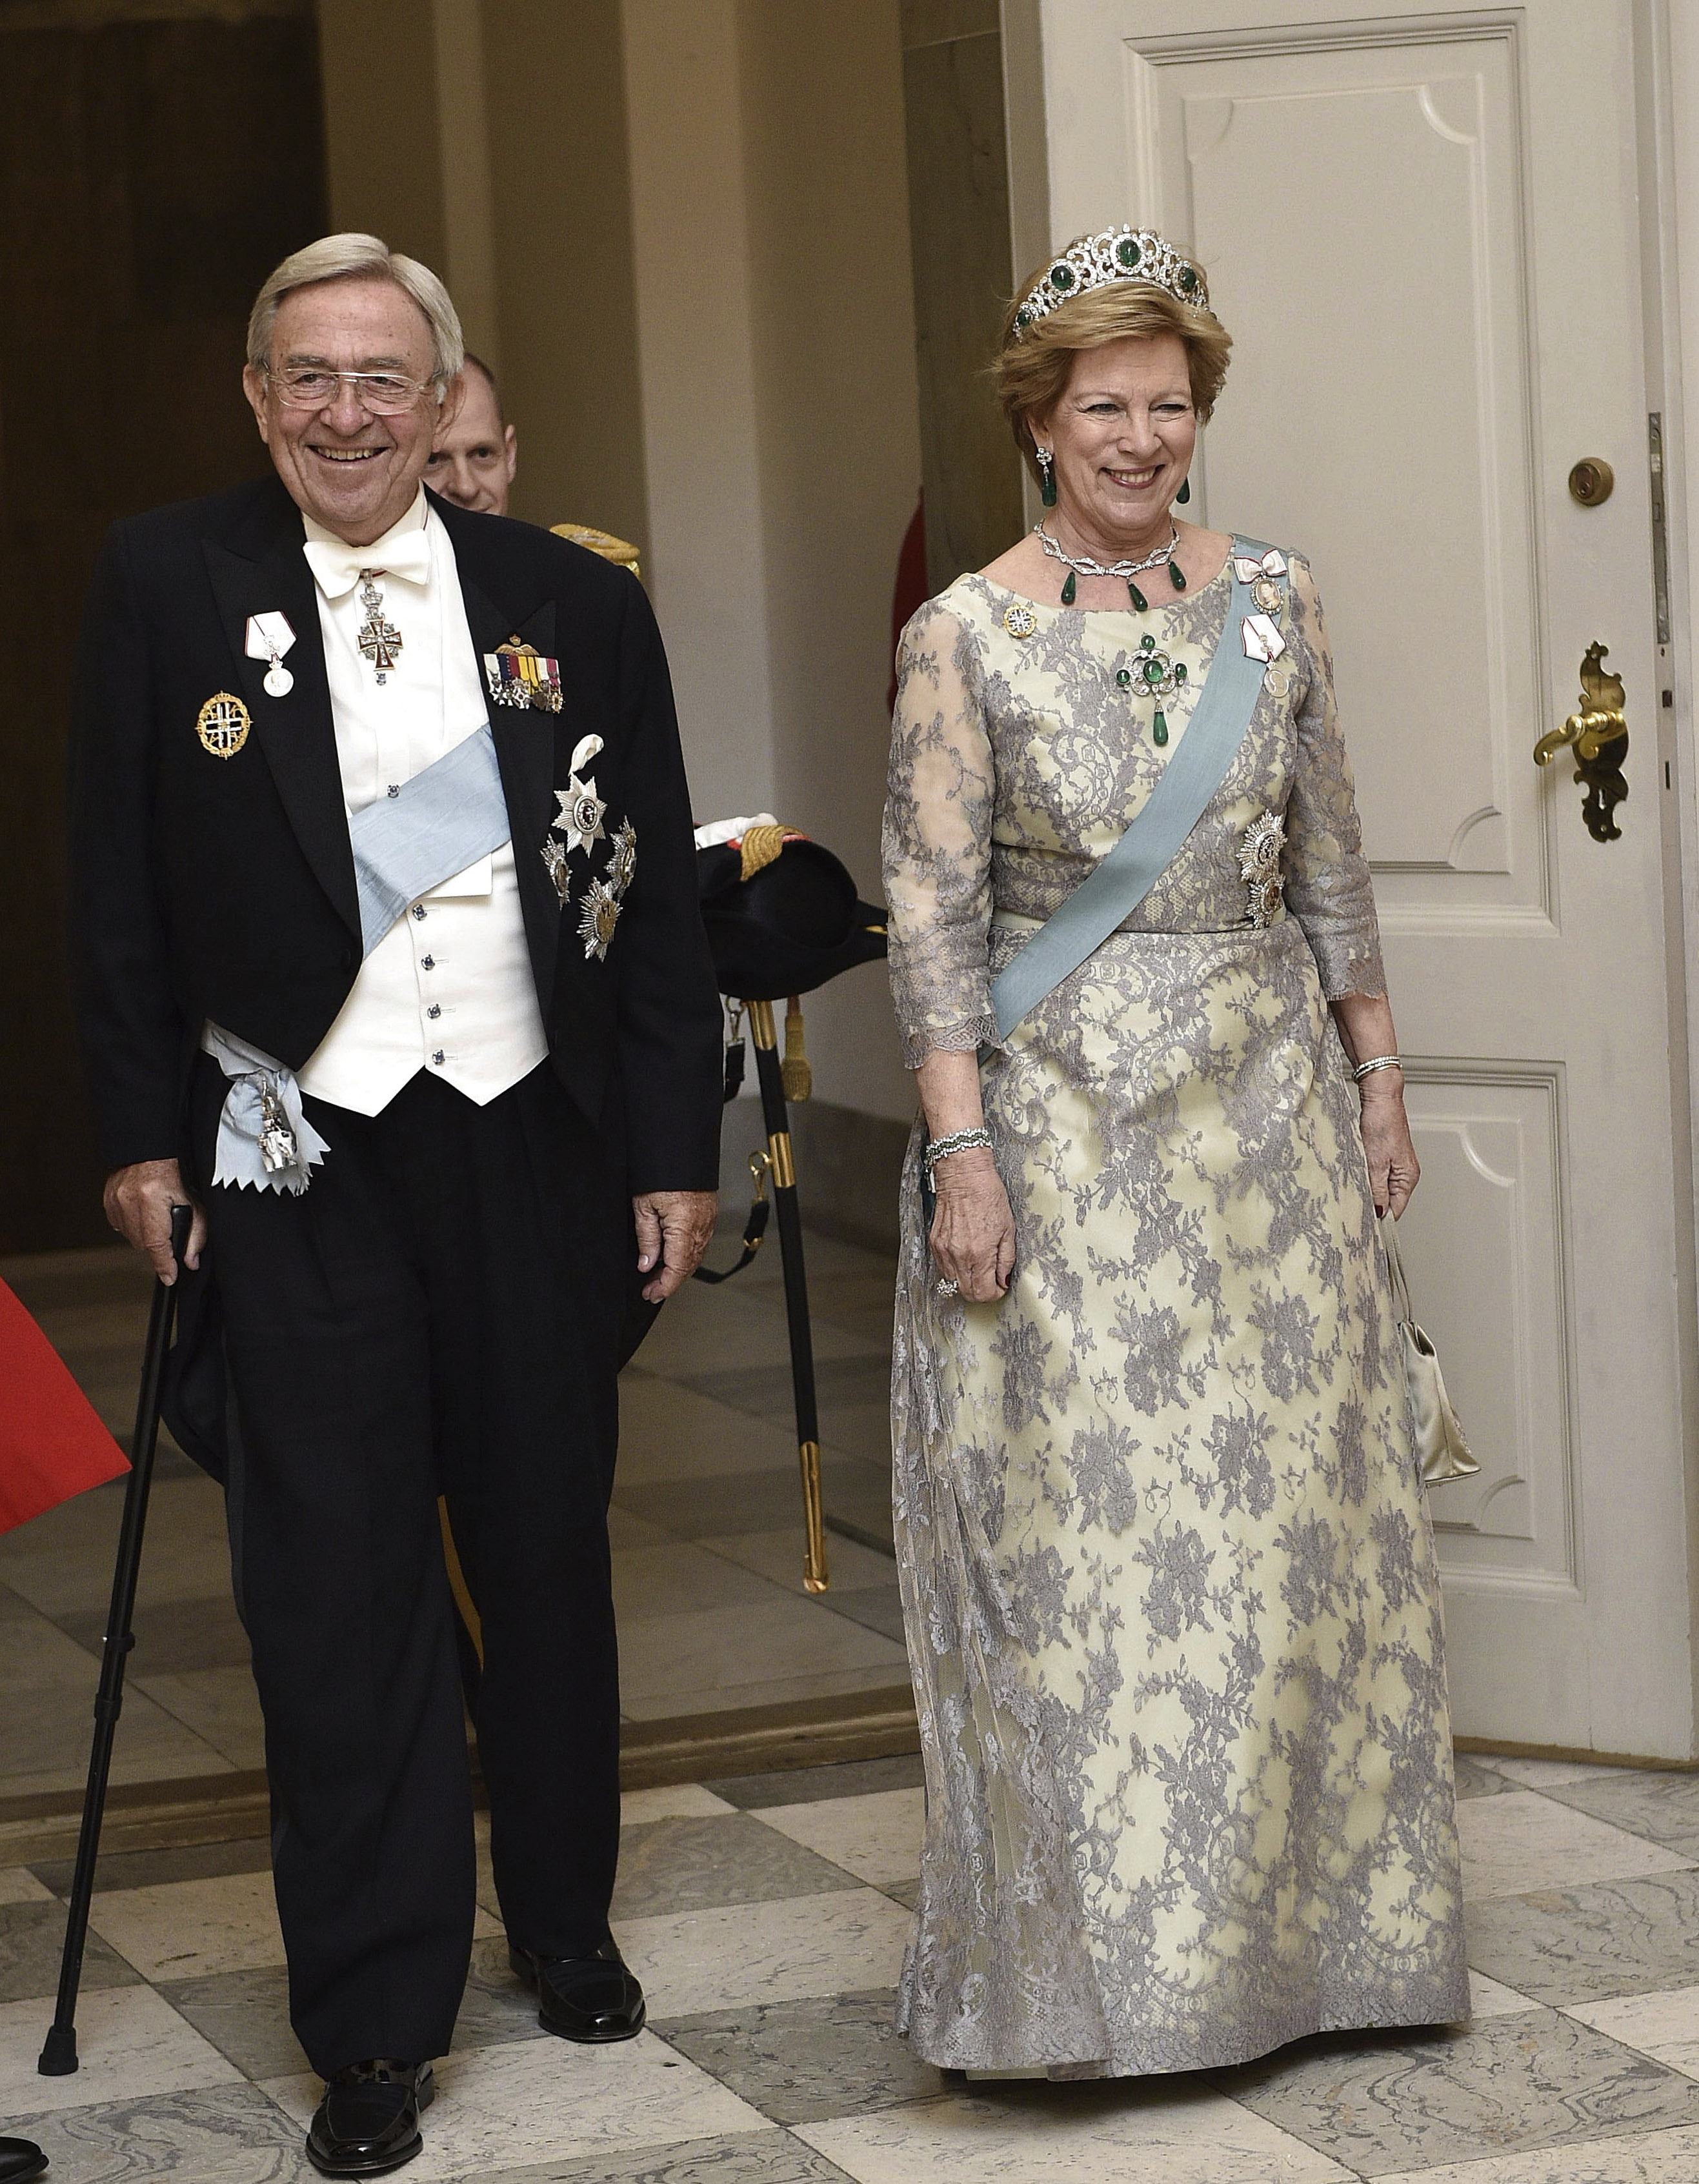 Former Greek king Constantine II and queen Anne-Marie arrive at a dinner at Christiansborg Castle in Copenhagen to celebrate the 75th birthday of Queen Margrethe II of Denmark in April 2015. Photo: AP